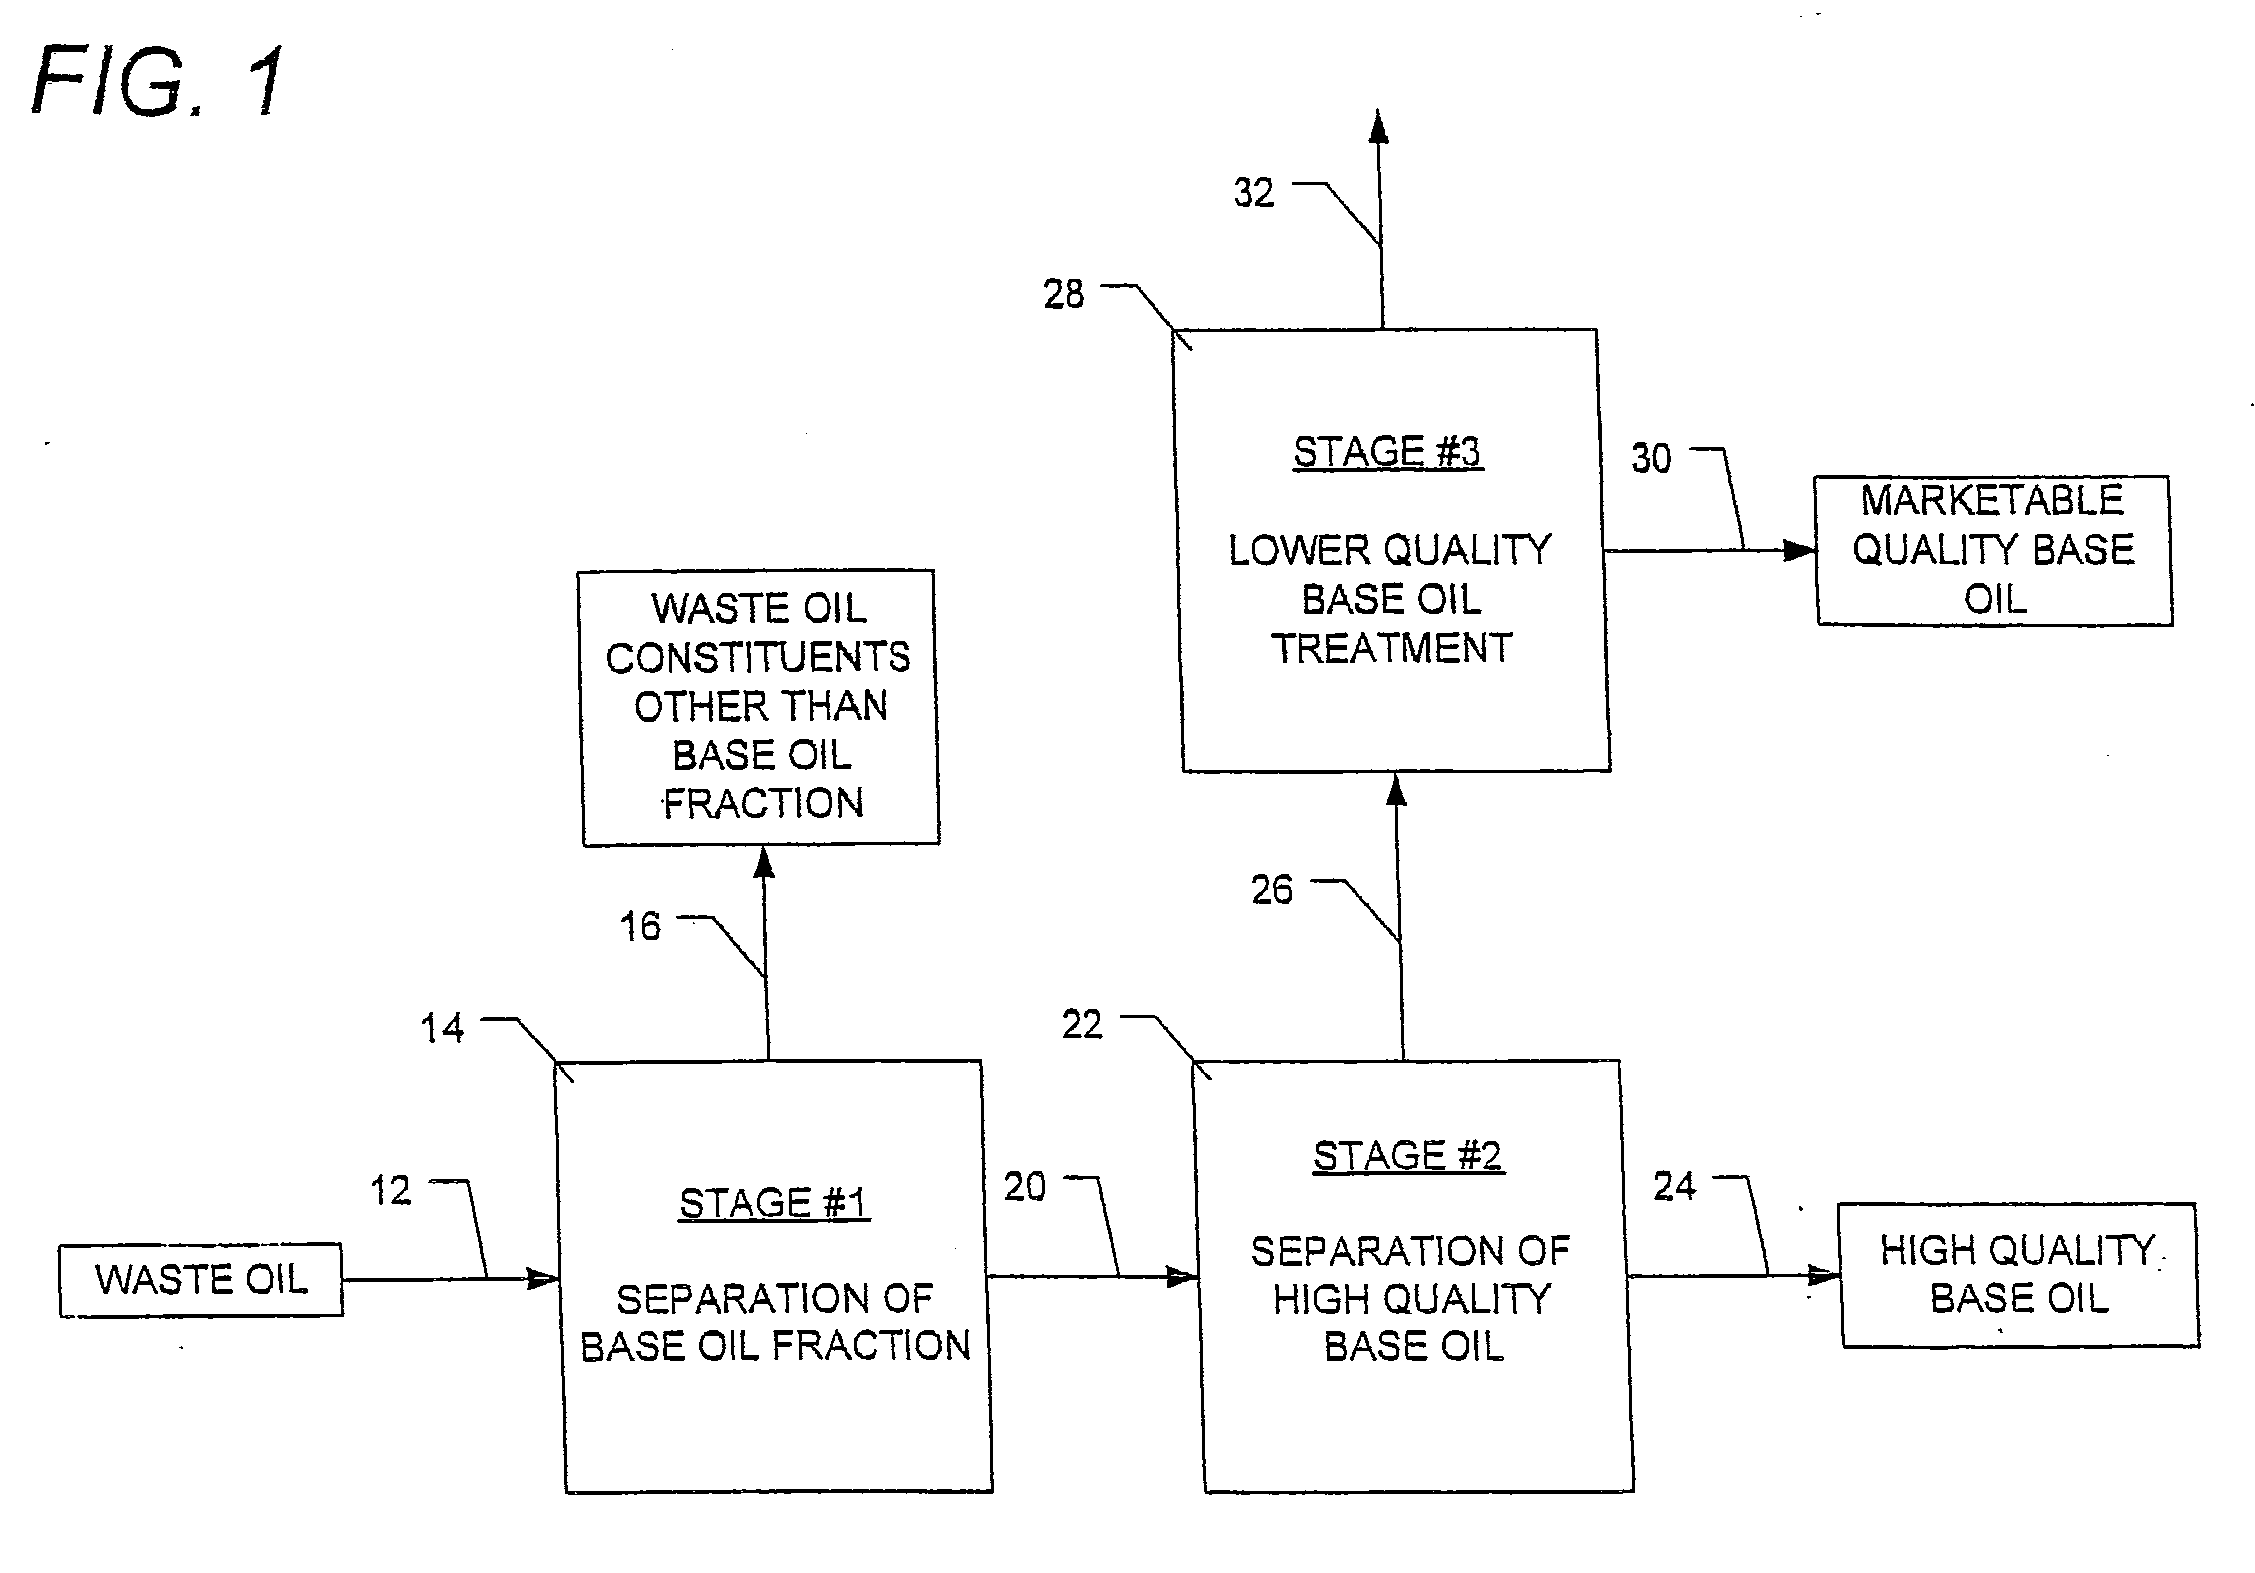 Method for producing base lubricating oil from waste oil